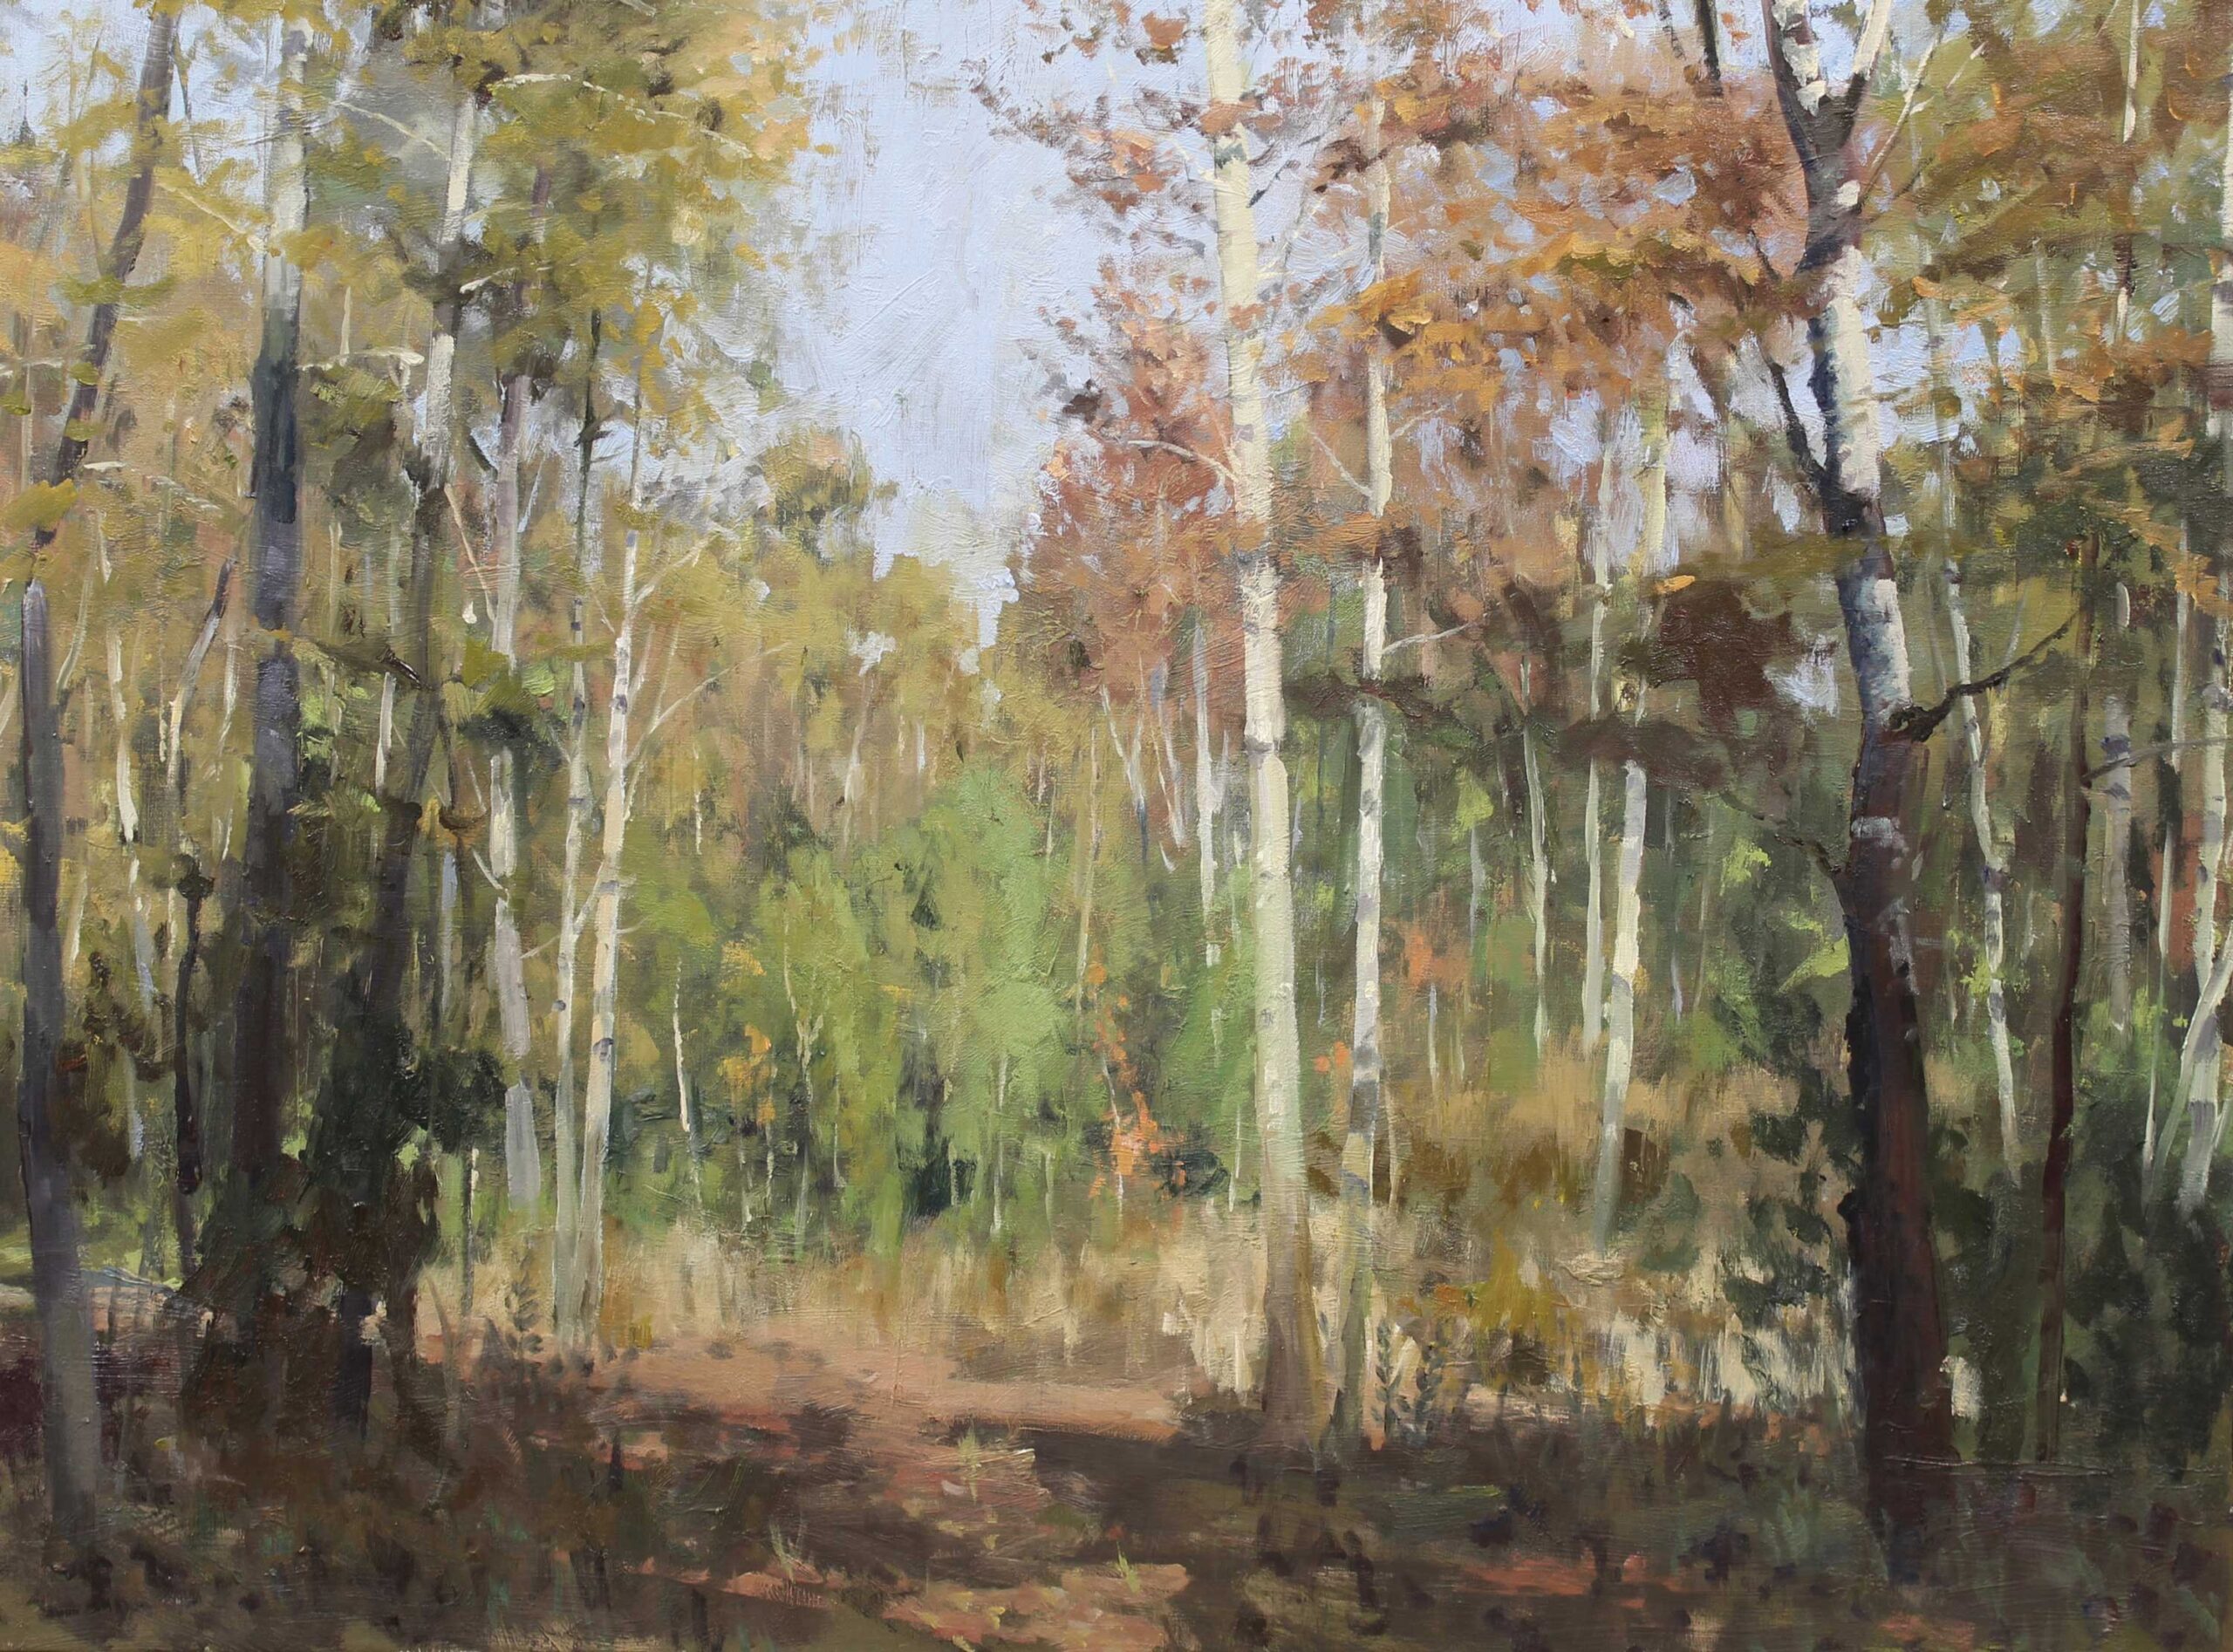 Roger Dale Brown, "A Walk through the Woods," 2020, oil on linen, 30 x 40 in, collection of the artist